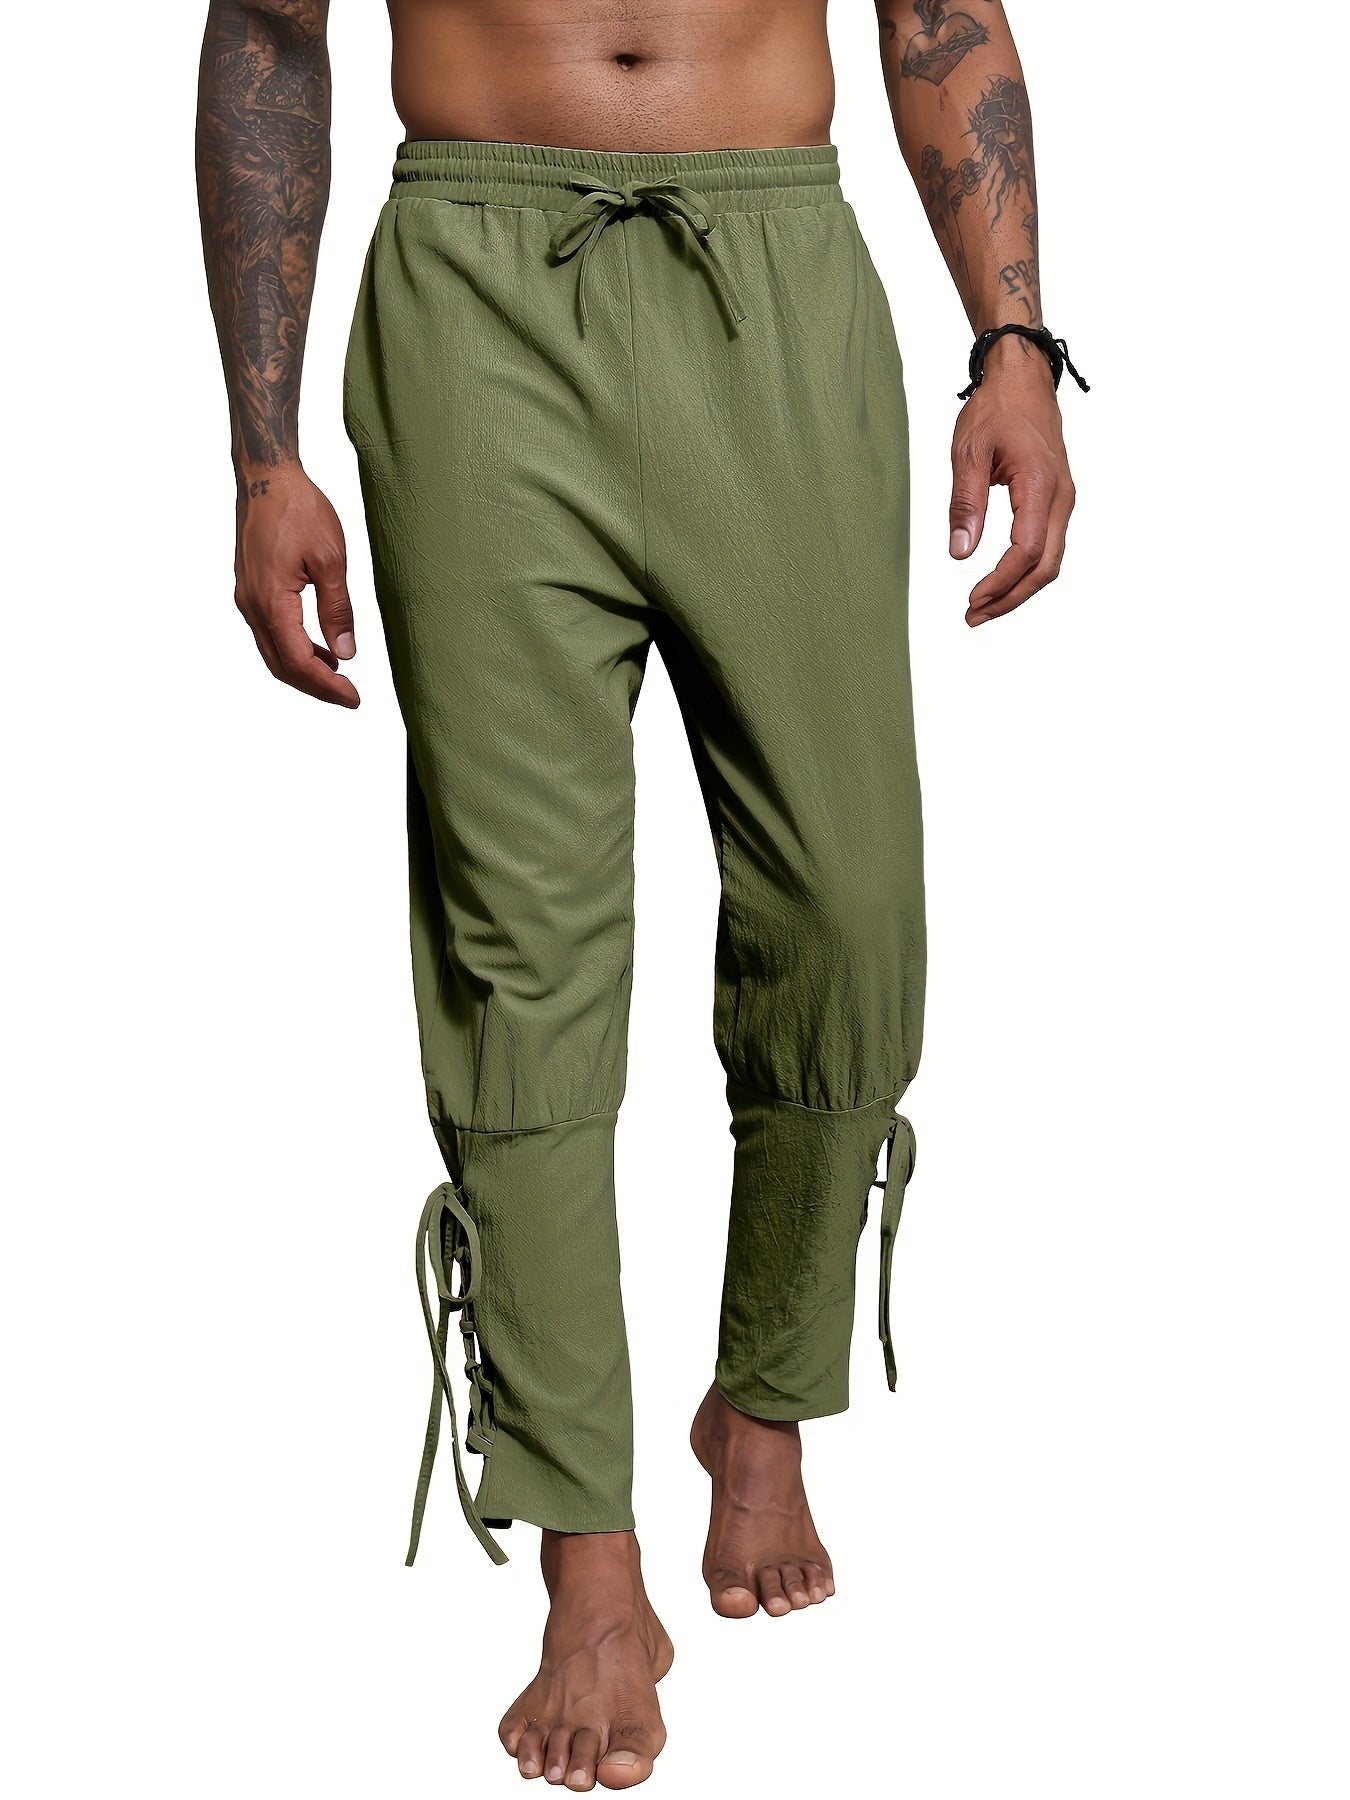 Cotton & Linen Blend Men's Lace Up Bottom Beach Harem Pant Retro Medieval Casual Cosplay Pirate Pants Halloween Streetwear  .As Gift